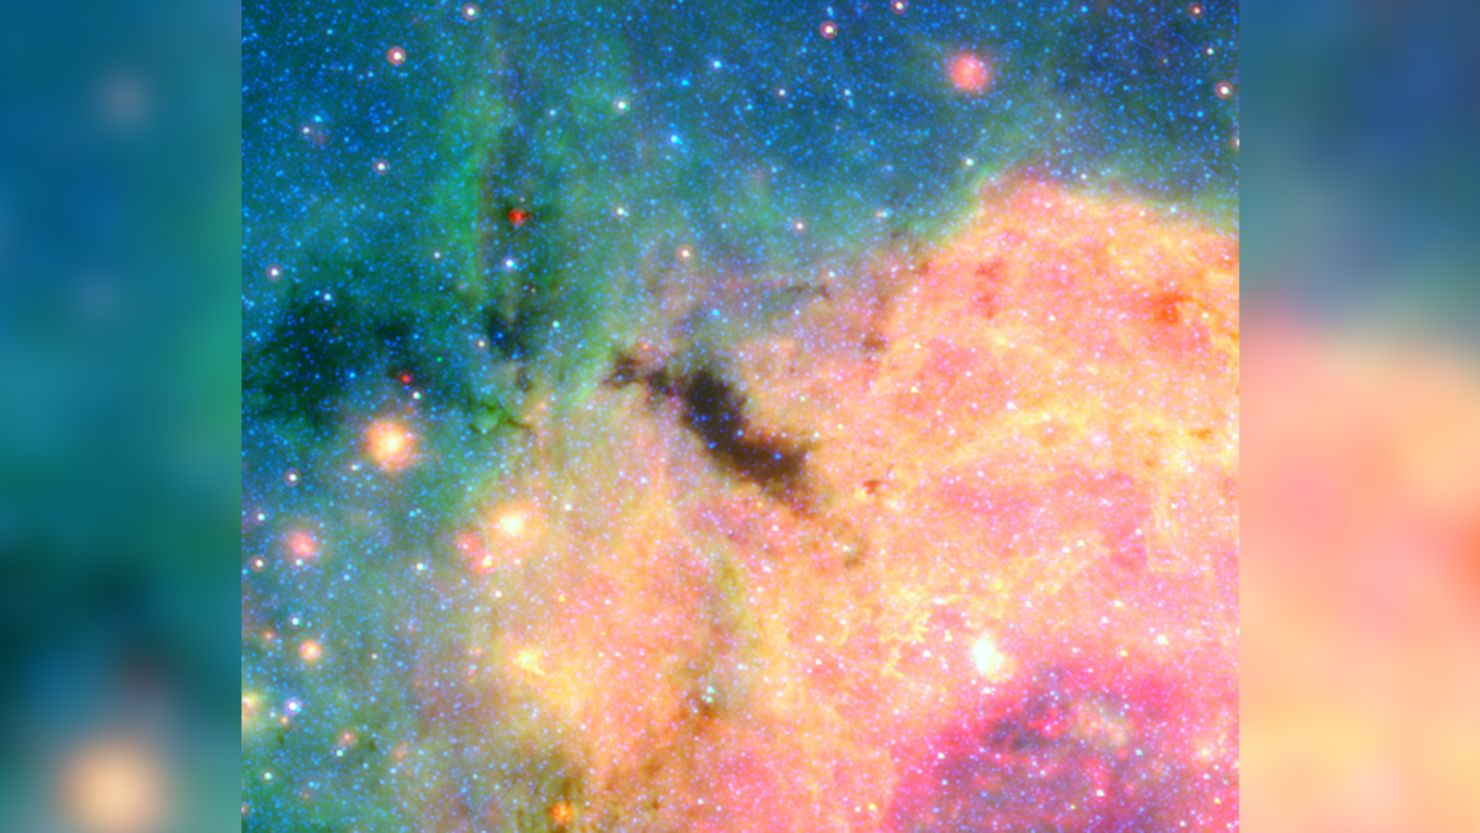 This view of the center of our galactic metropolis was captured by the Spitzer Space Telescope, offering an infrared view of the frenzied scene at the center of our Milky Way and revealing what lies behind the dust. "The Brick" is the dark blob at the center of the image, and the more advanced James Webb Space Telescope is offering researchers a closer look.